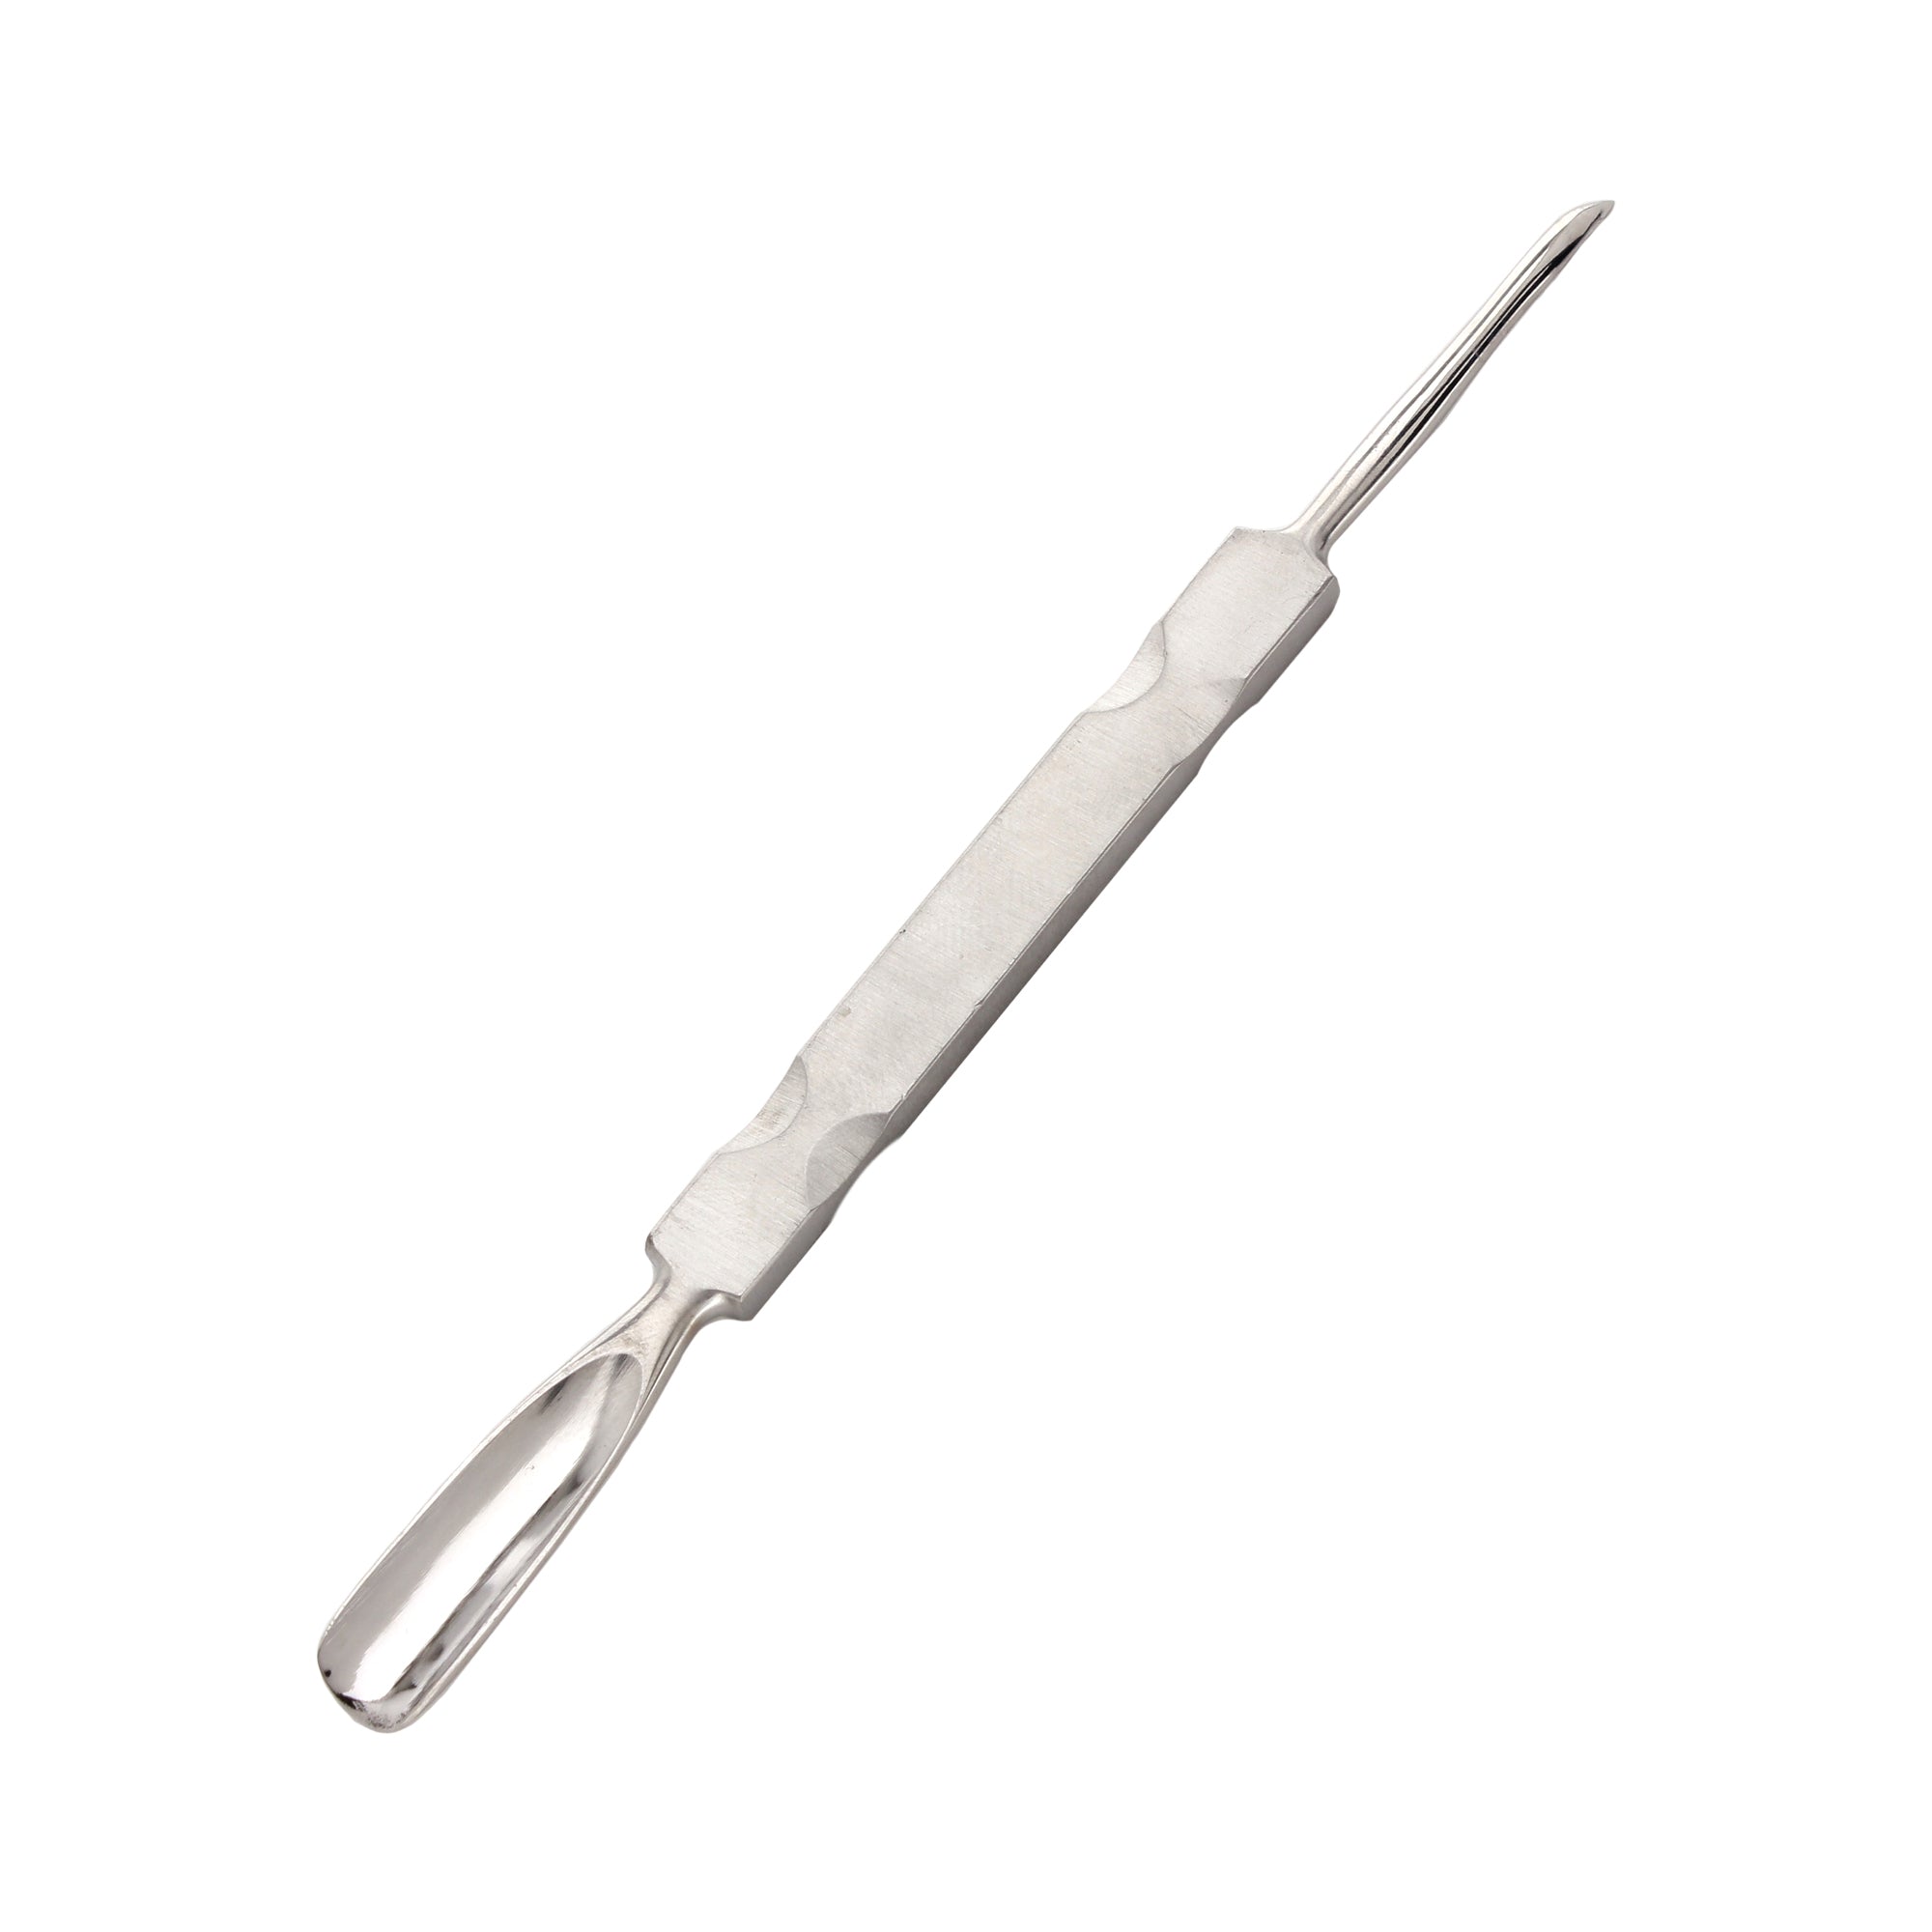 Stainless Steel Cuticle Pusher - A